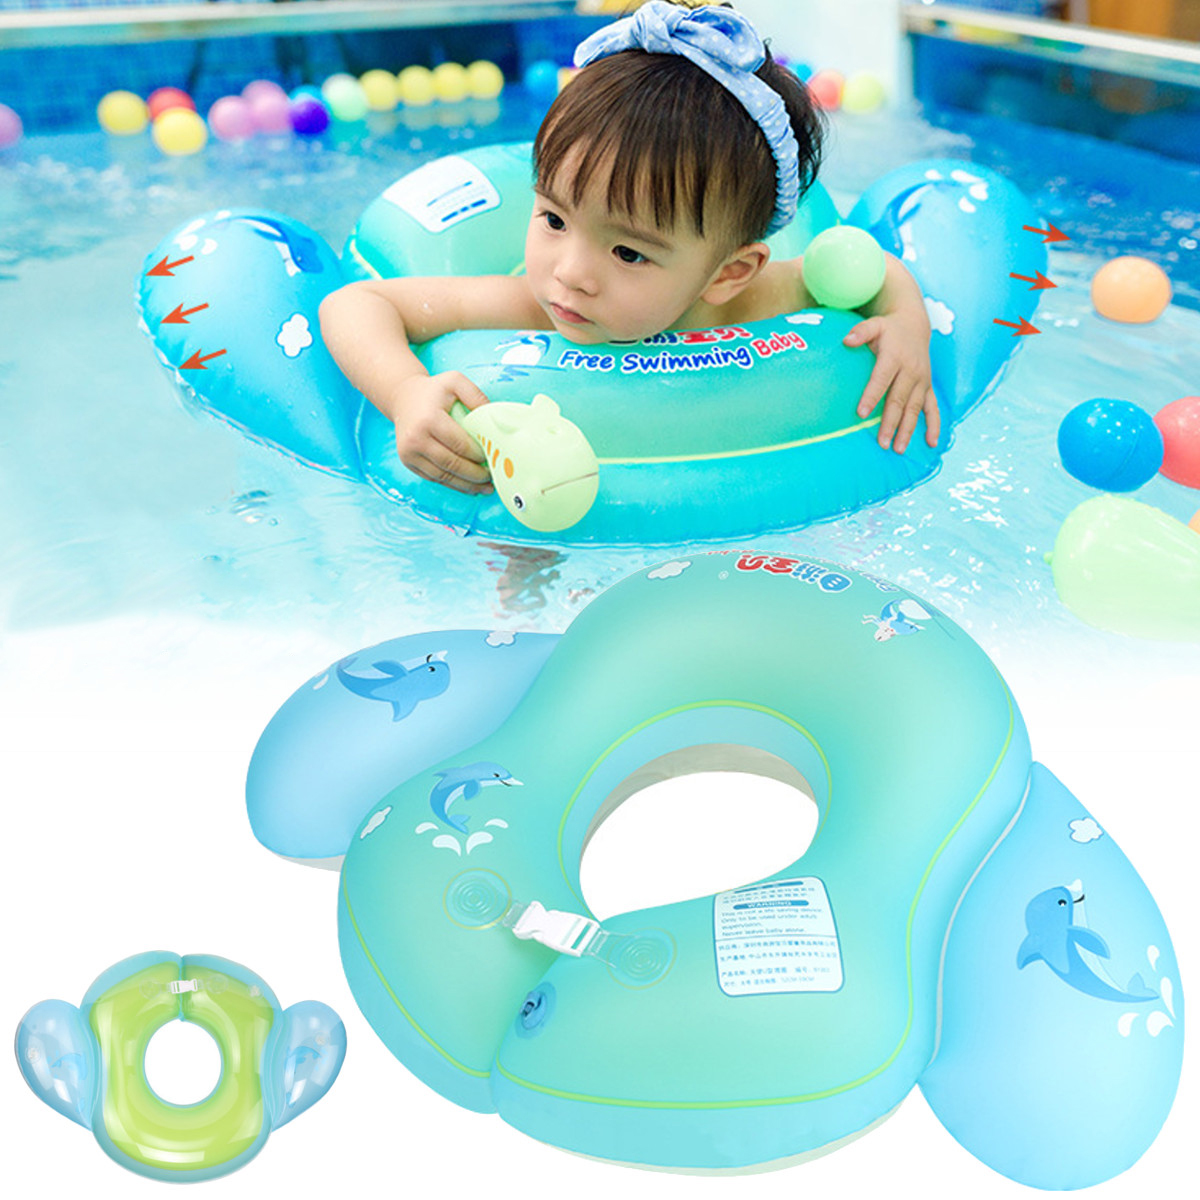 

Outdoor Baby Float Swimming Ring Kids Inflatable Infants Swim Trainer Pool Water Fun Toy